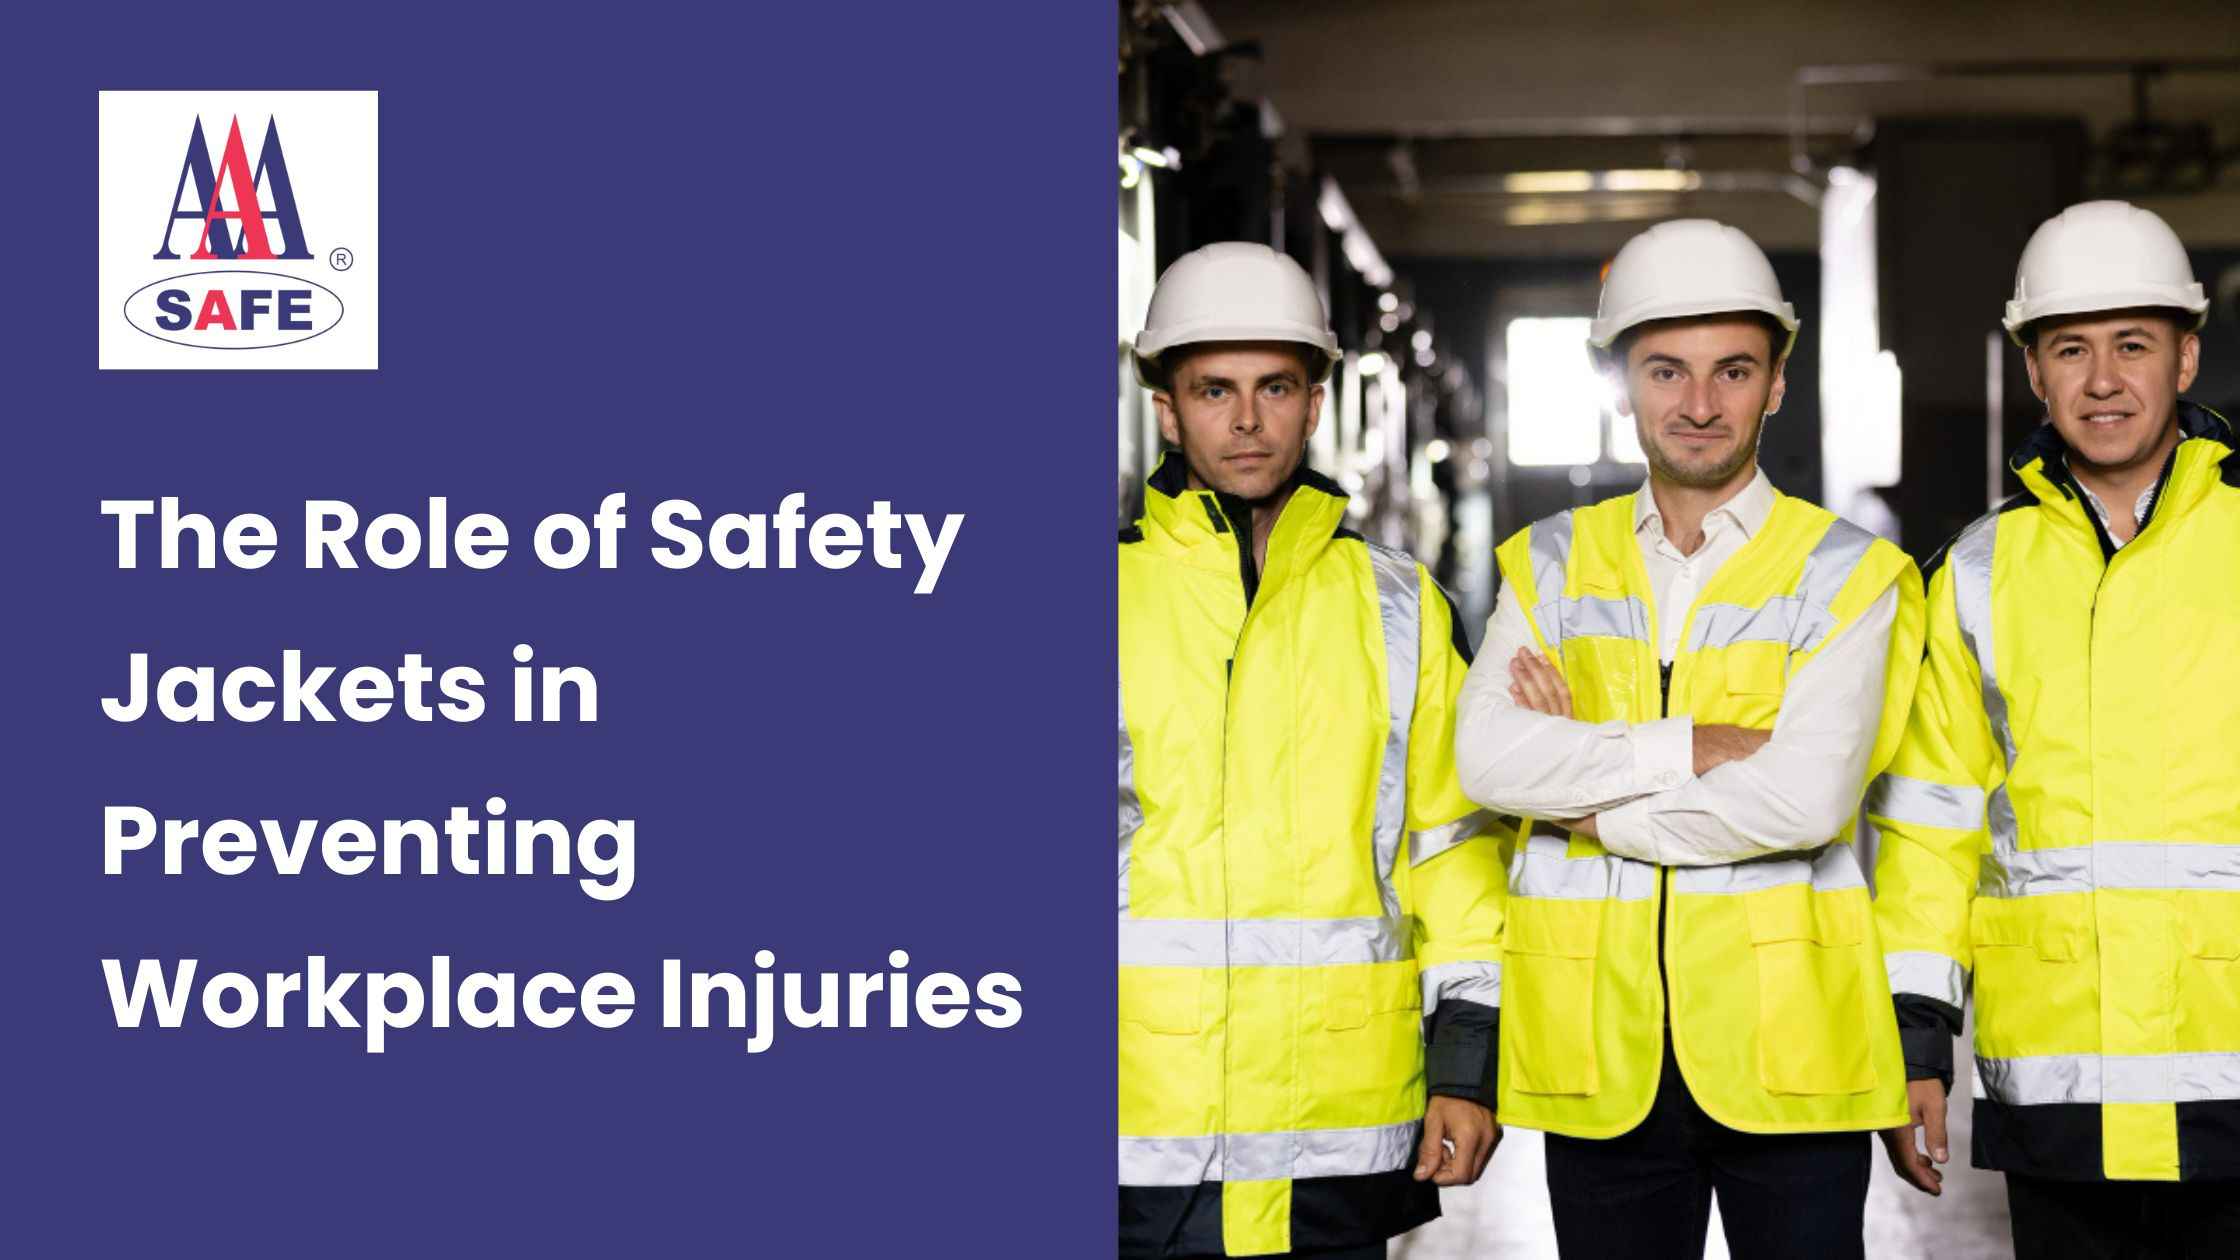 The Role of Safety Jackets in Preventing Workplace Injuries